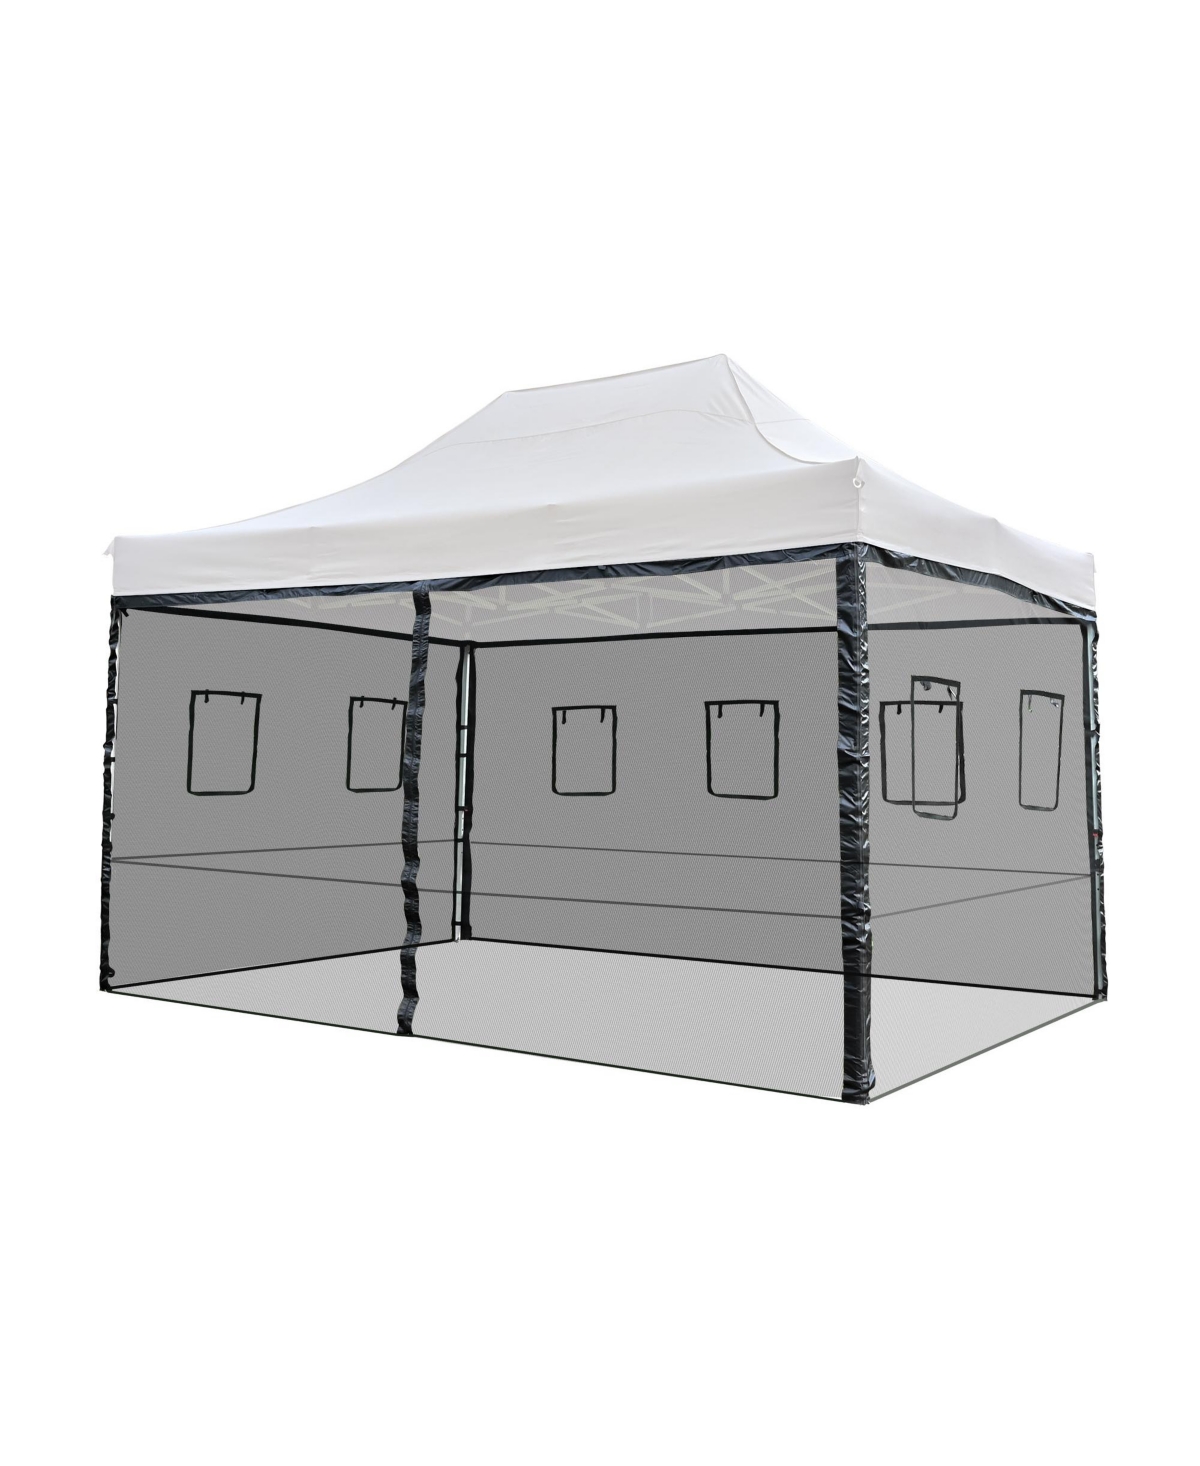 4 Mesh Sidewalls for 15x10 Ft Pop Up Canopy Tent with Windows Food Vendor Fair - Natural